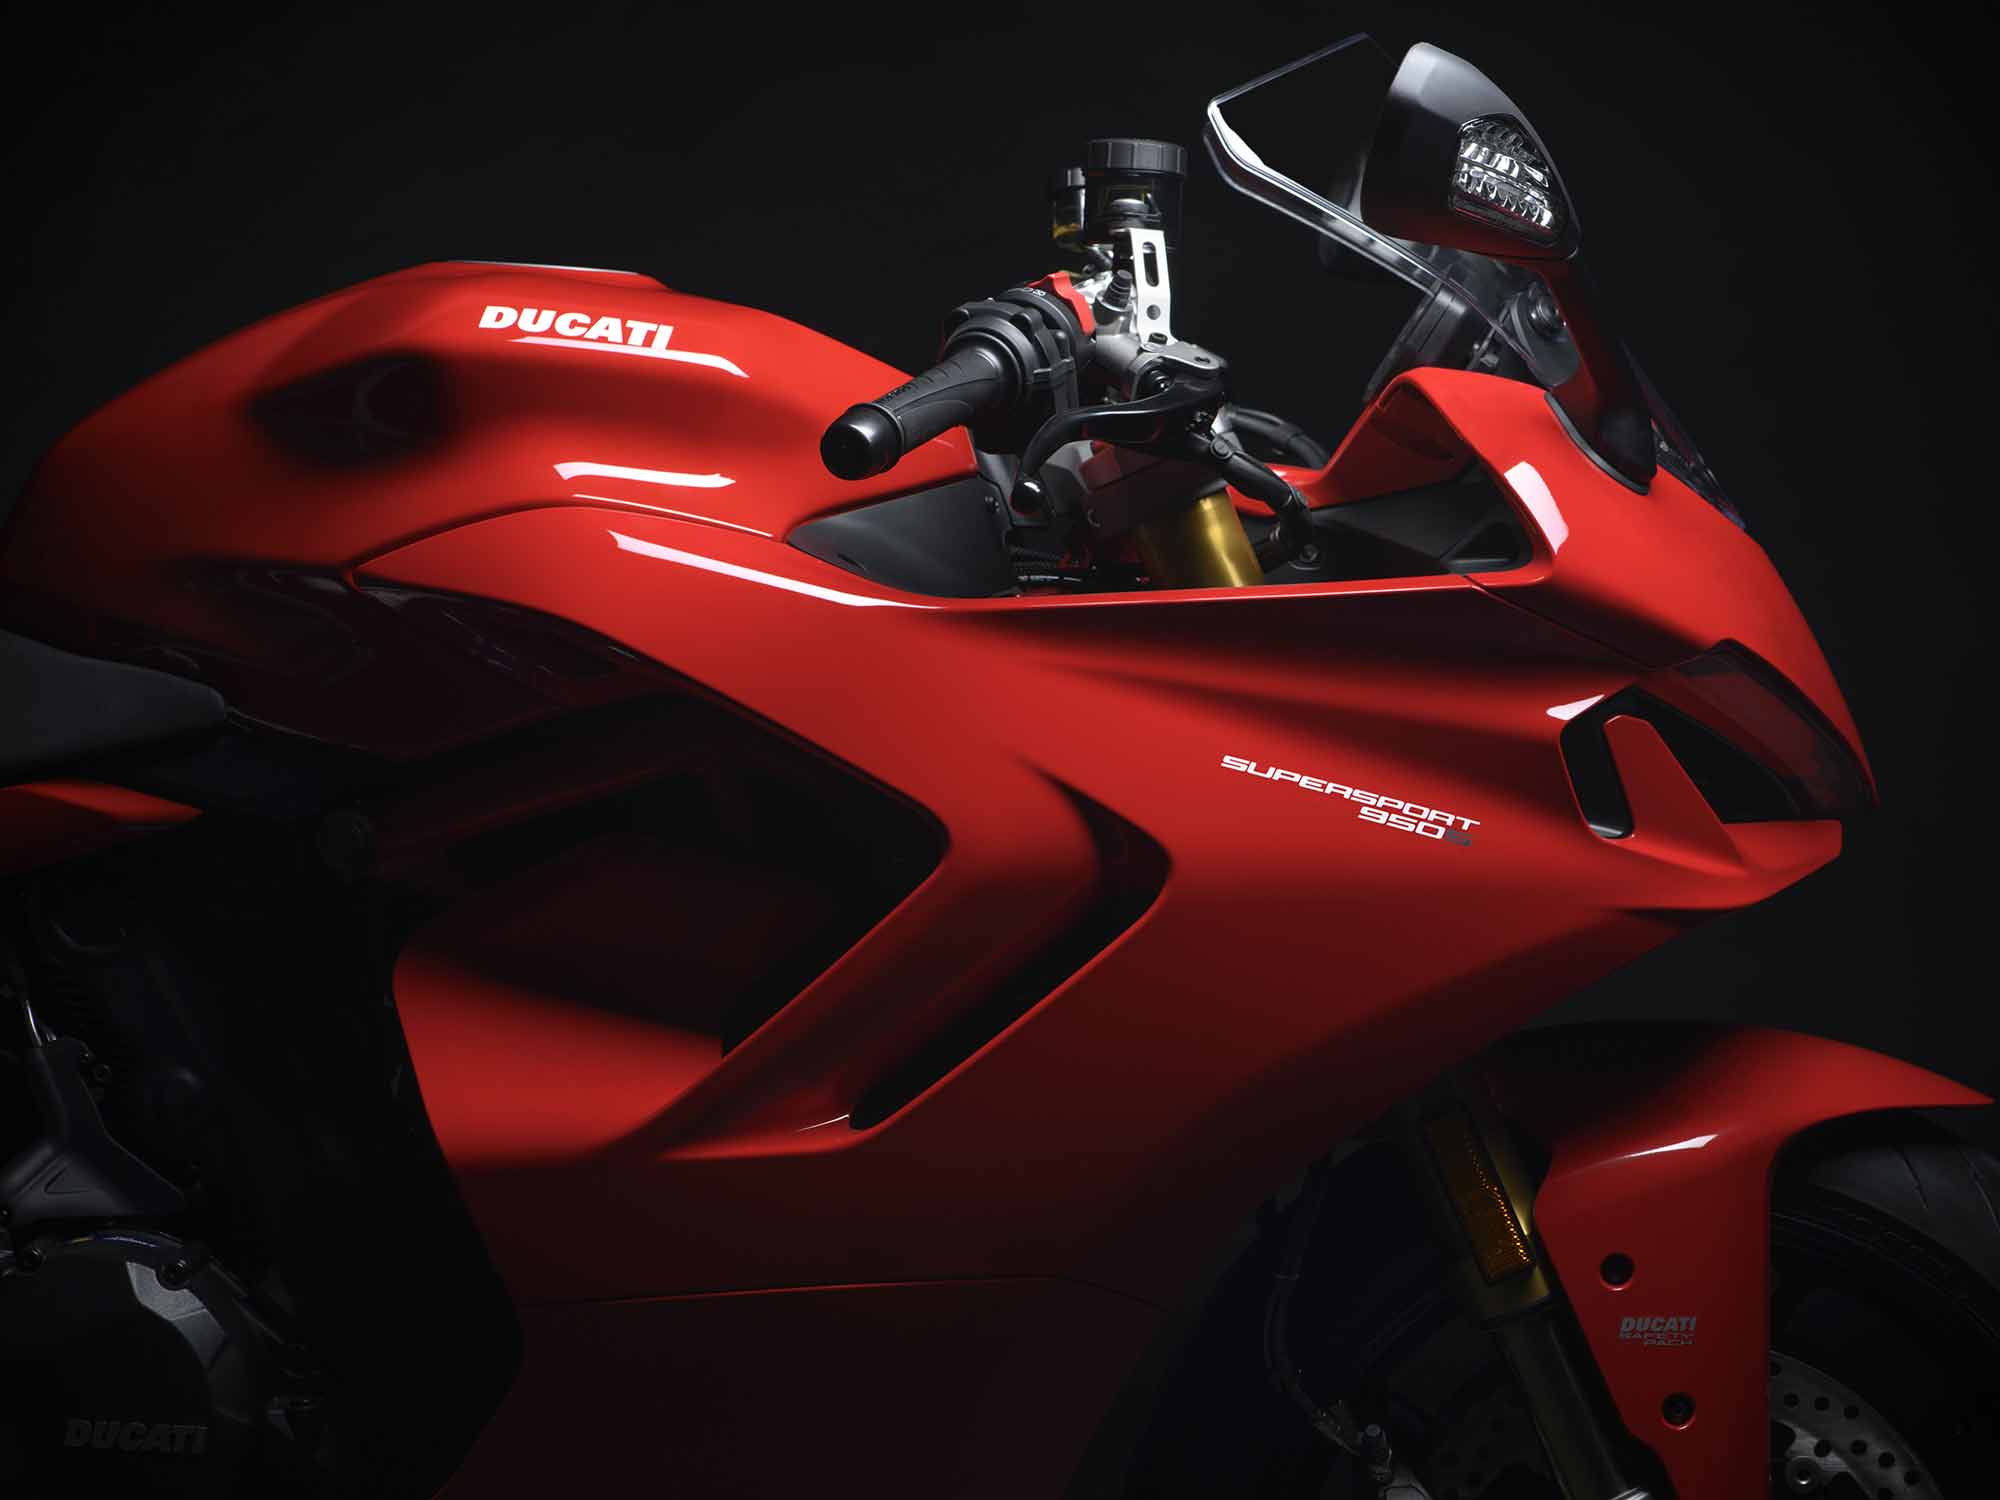 The 2021 Ducati Lineup + Our Take On Each Model - webBikeWorld